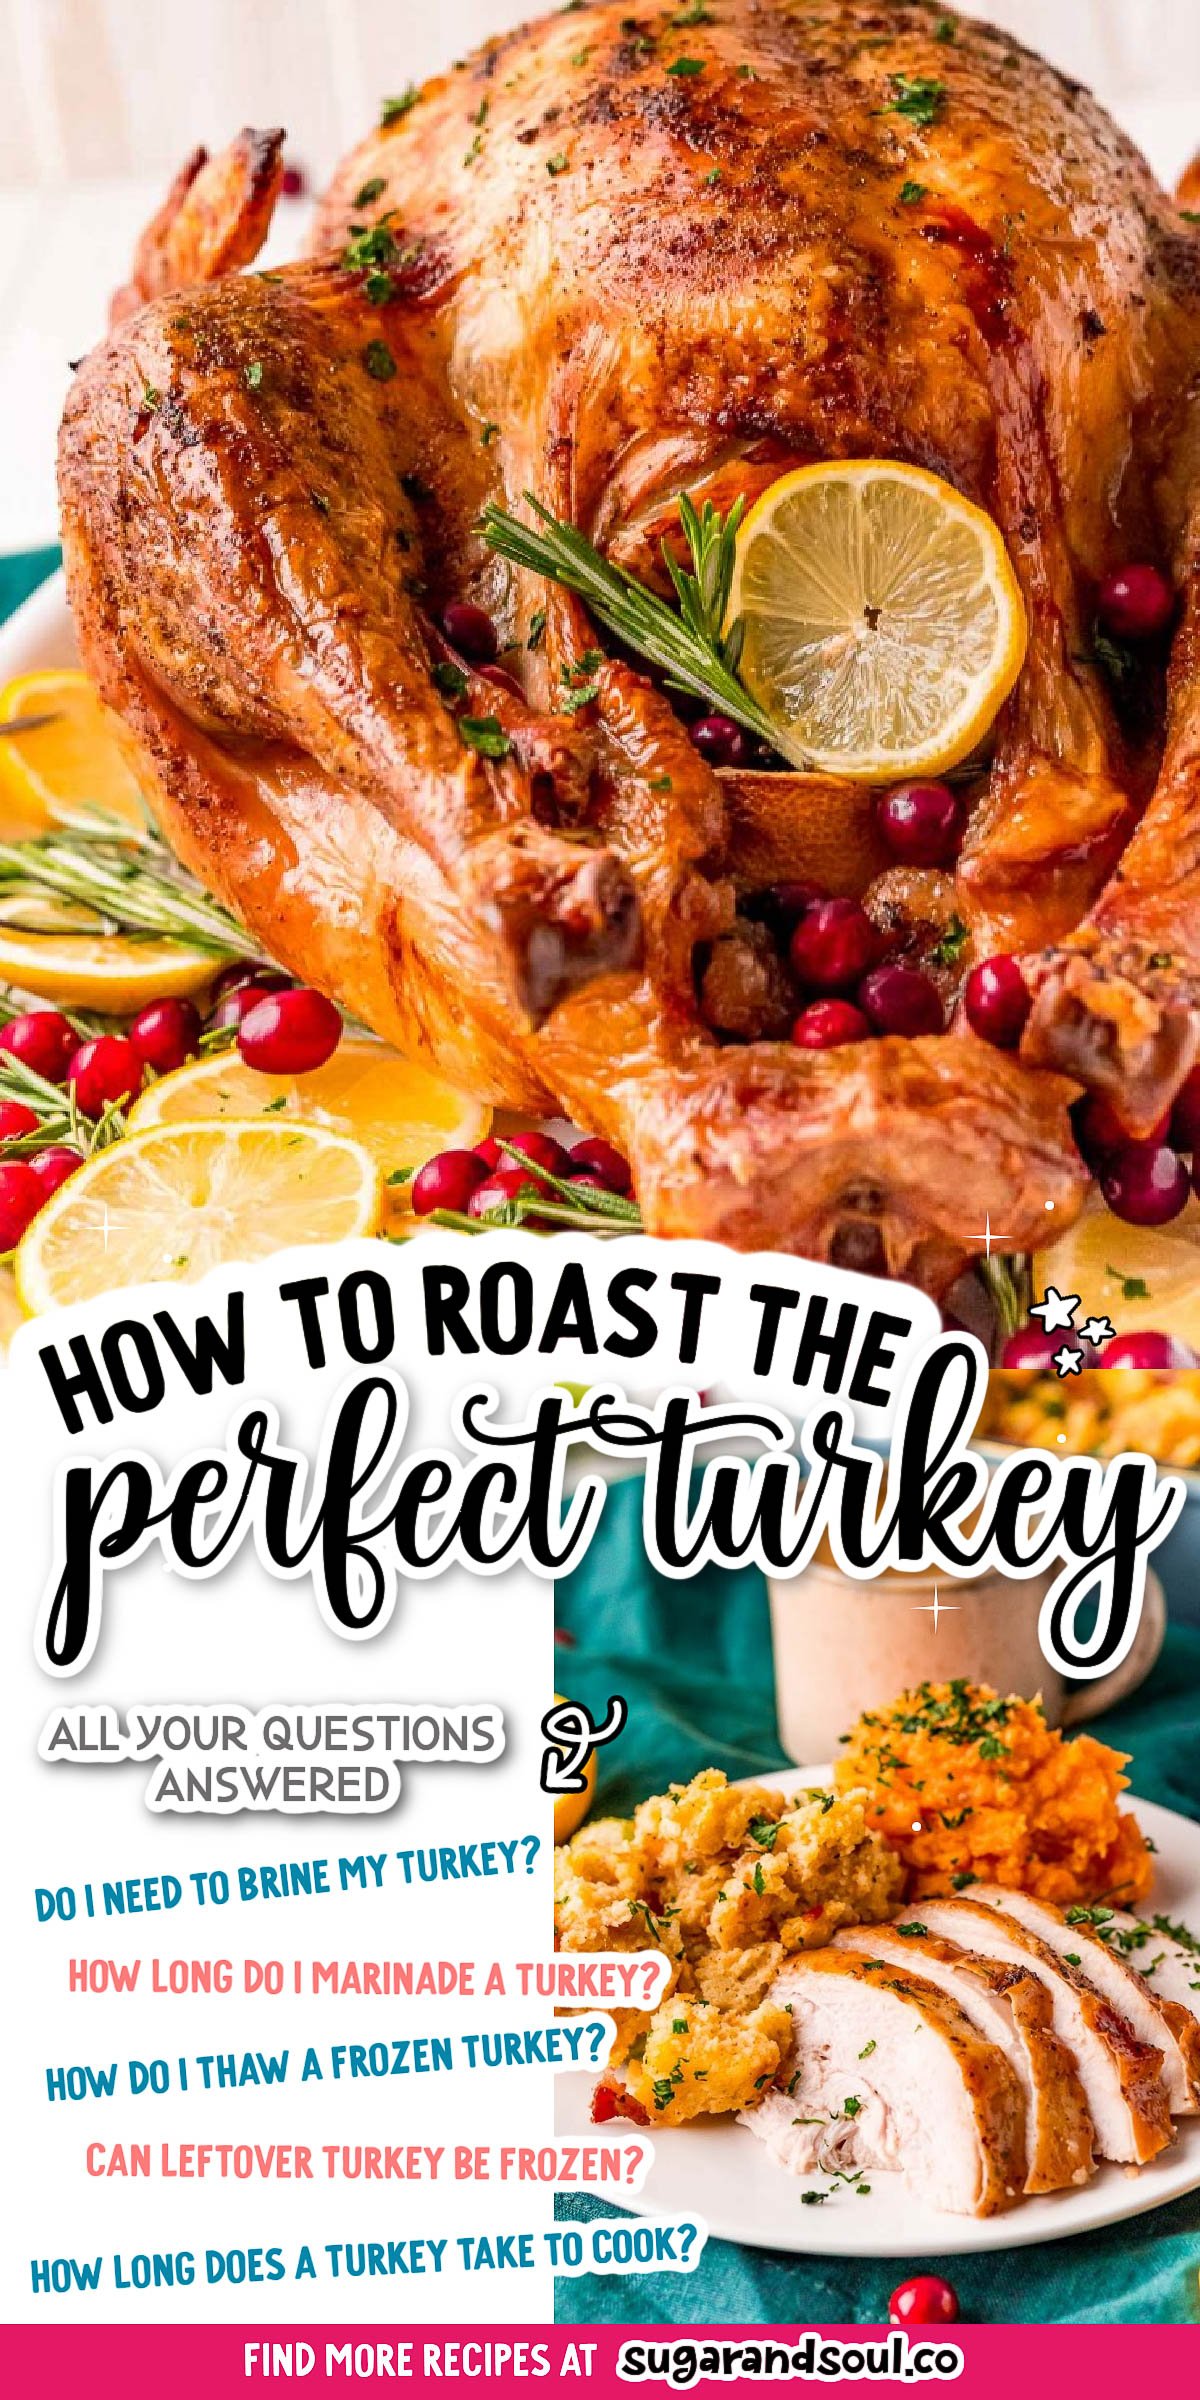 Cooking a Turkey is easier than ever! Follow my simple recipe for preparing and roasting a delicious and juicy Thanksgiving Turkey that will impress the whole family! via @sugarandsoulco